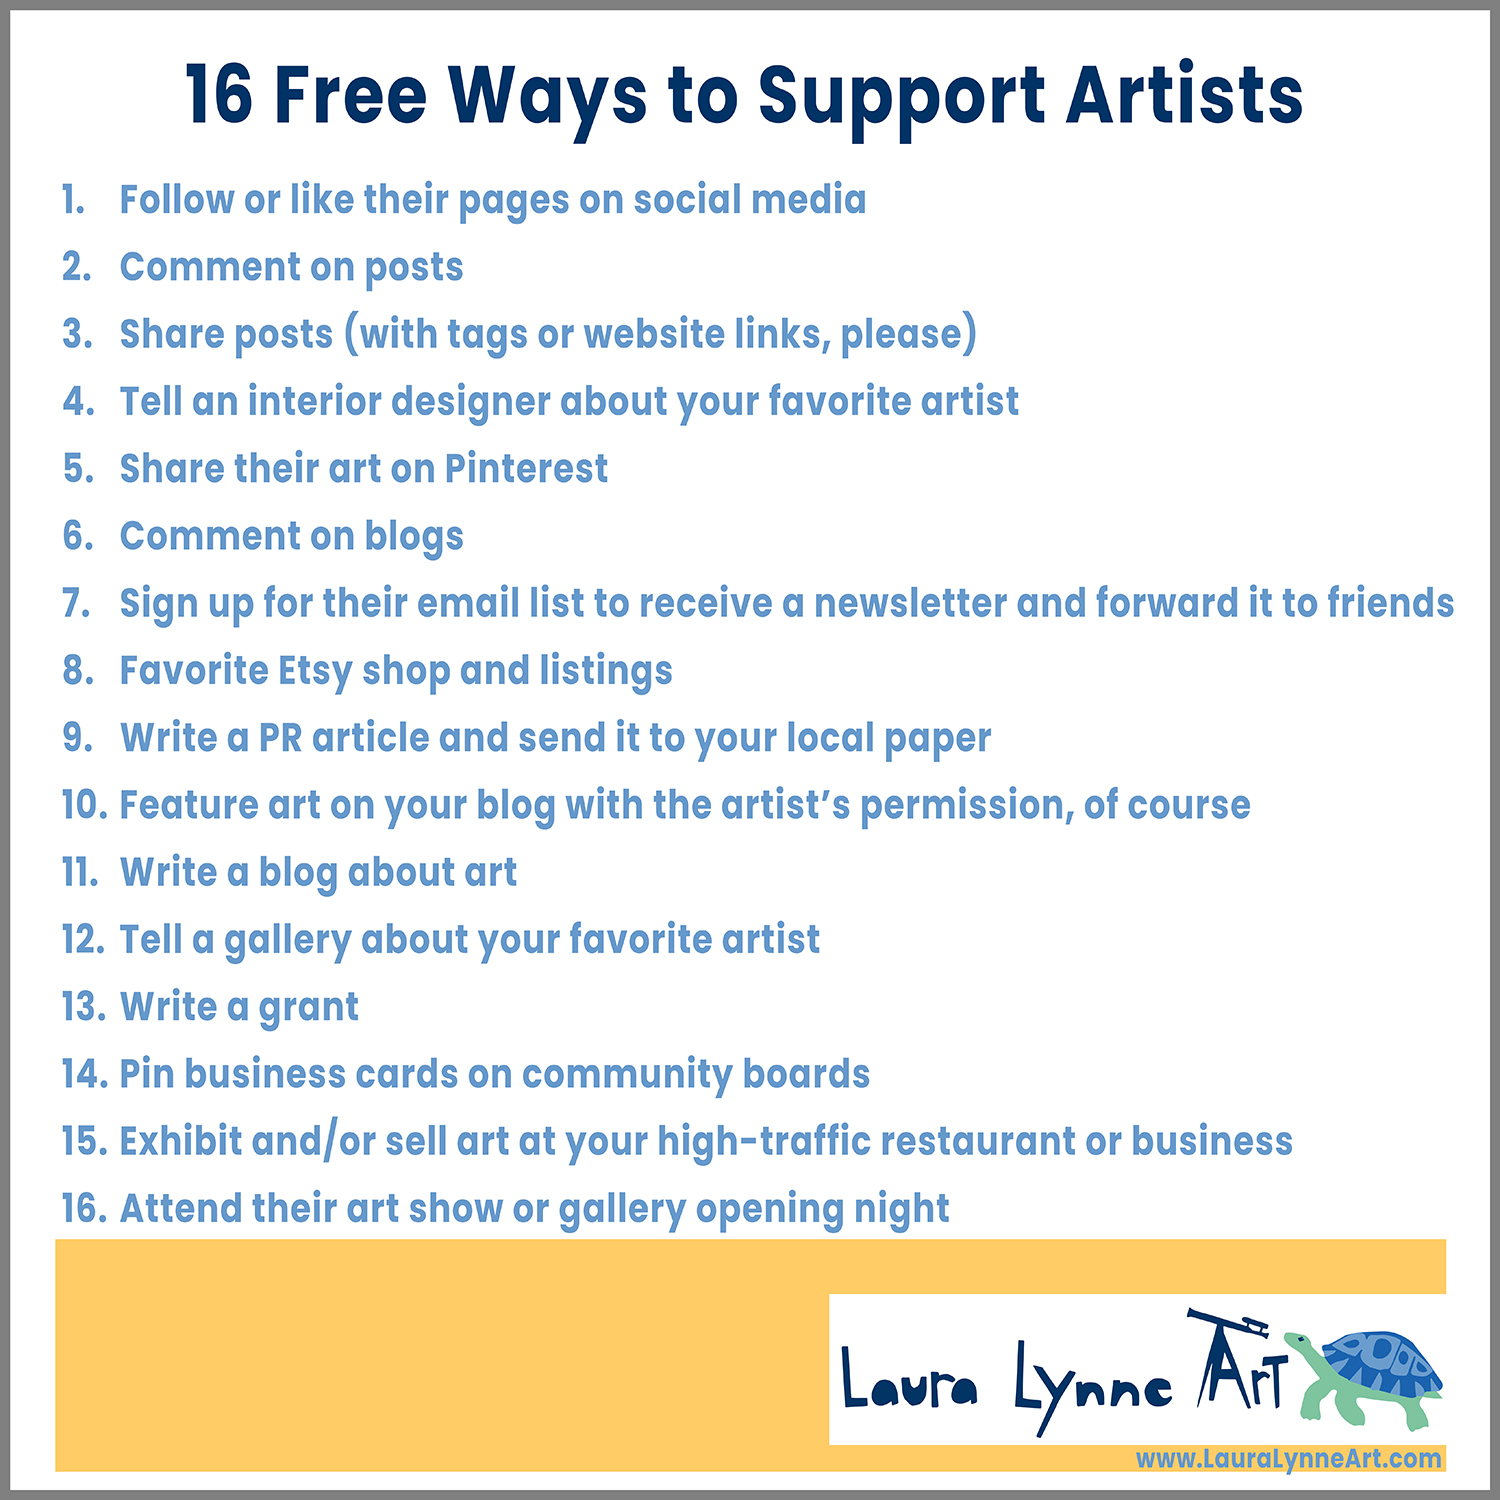 16 free ways to support artists